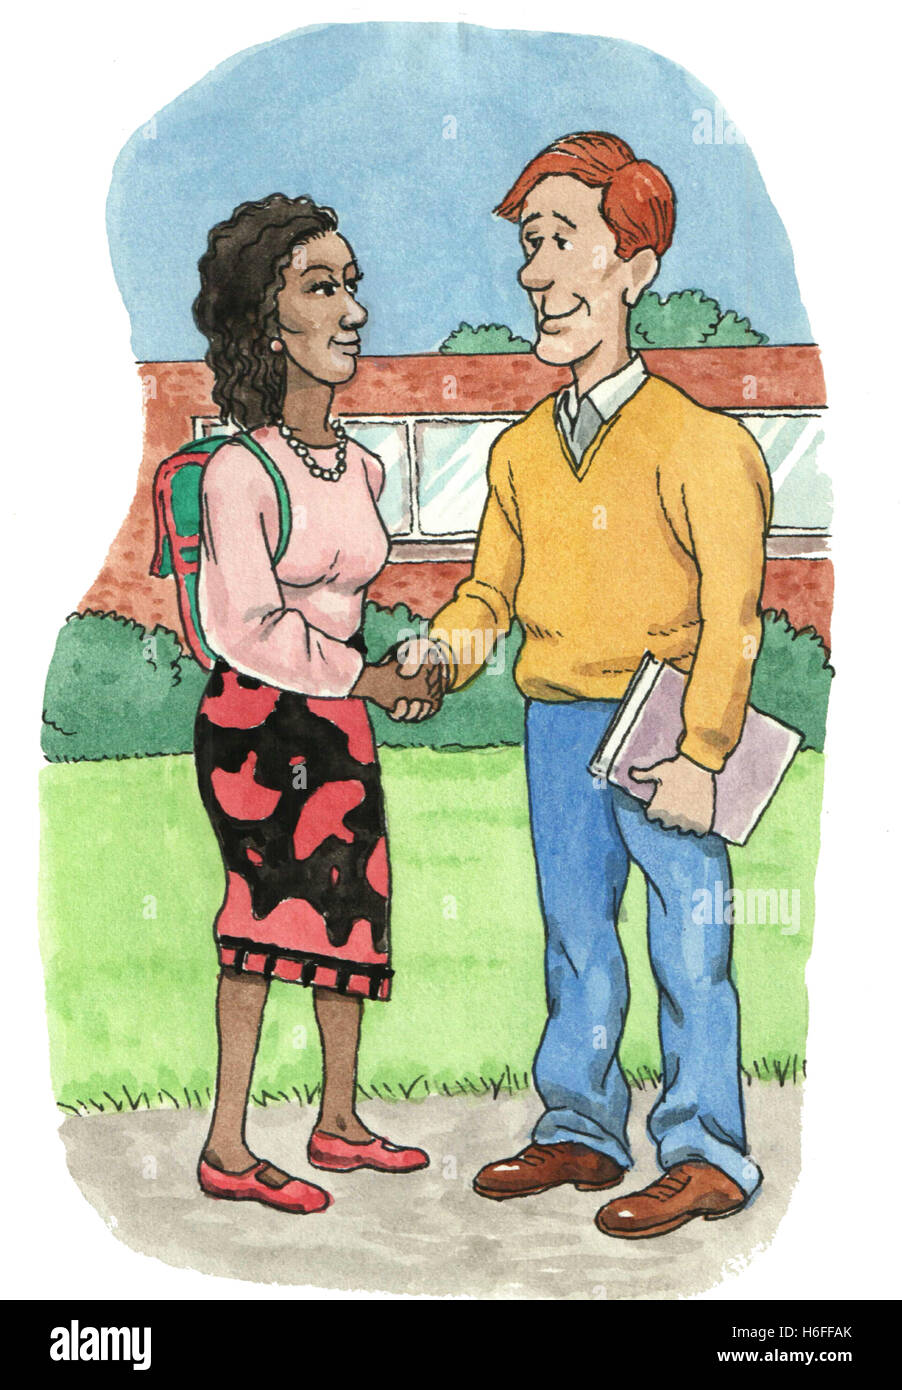 Color illustration of a black woman shaking hands with a white man. Stock Photo